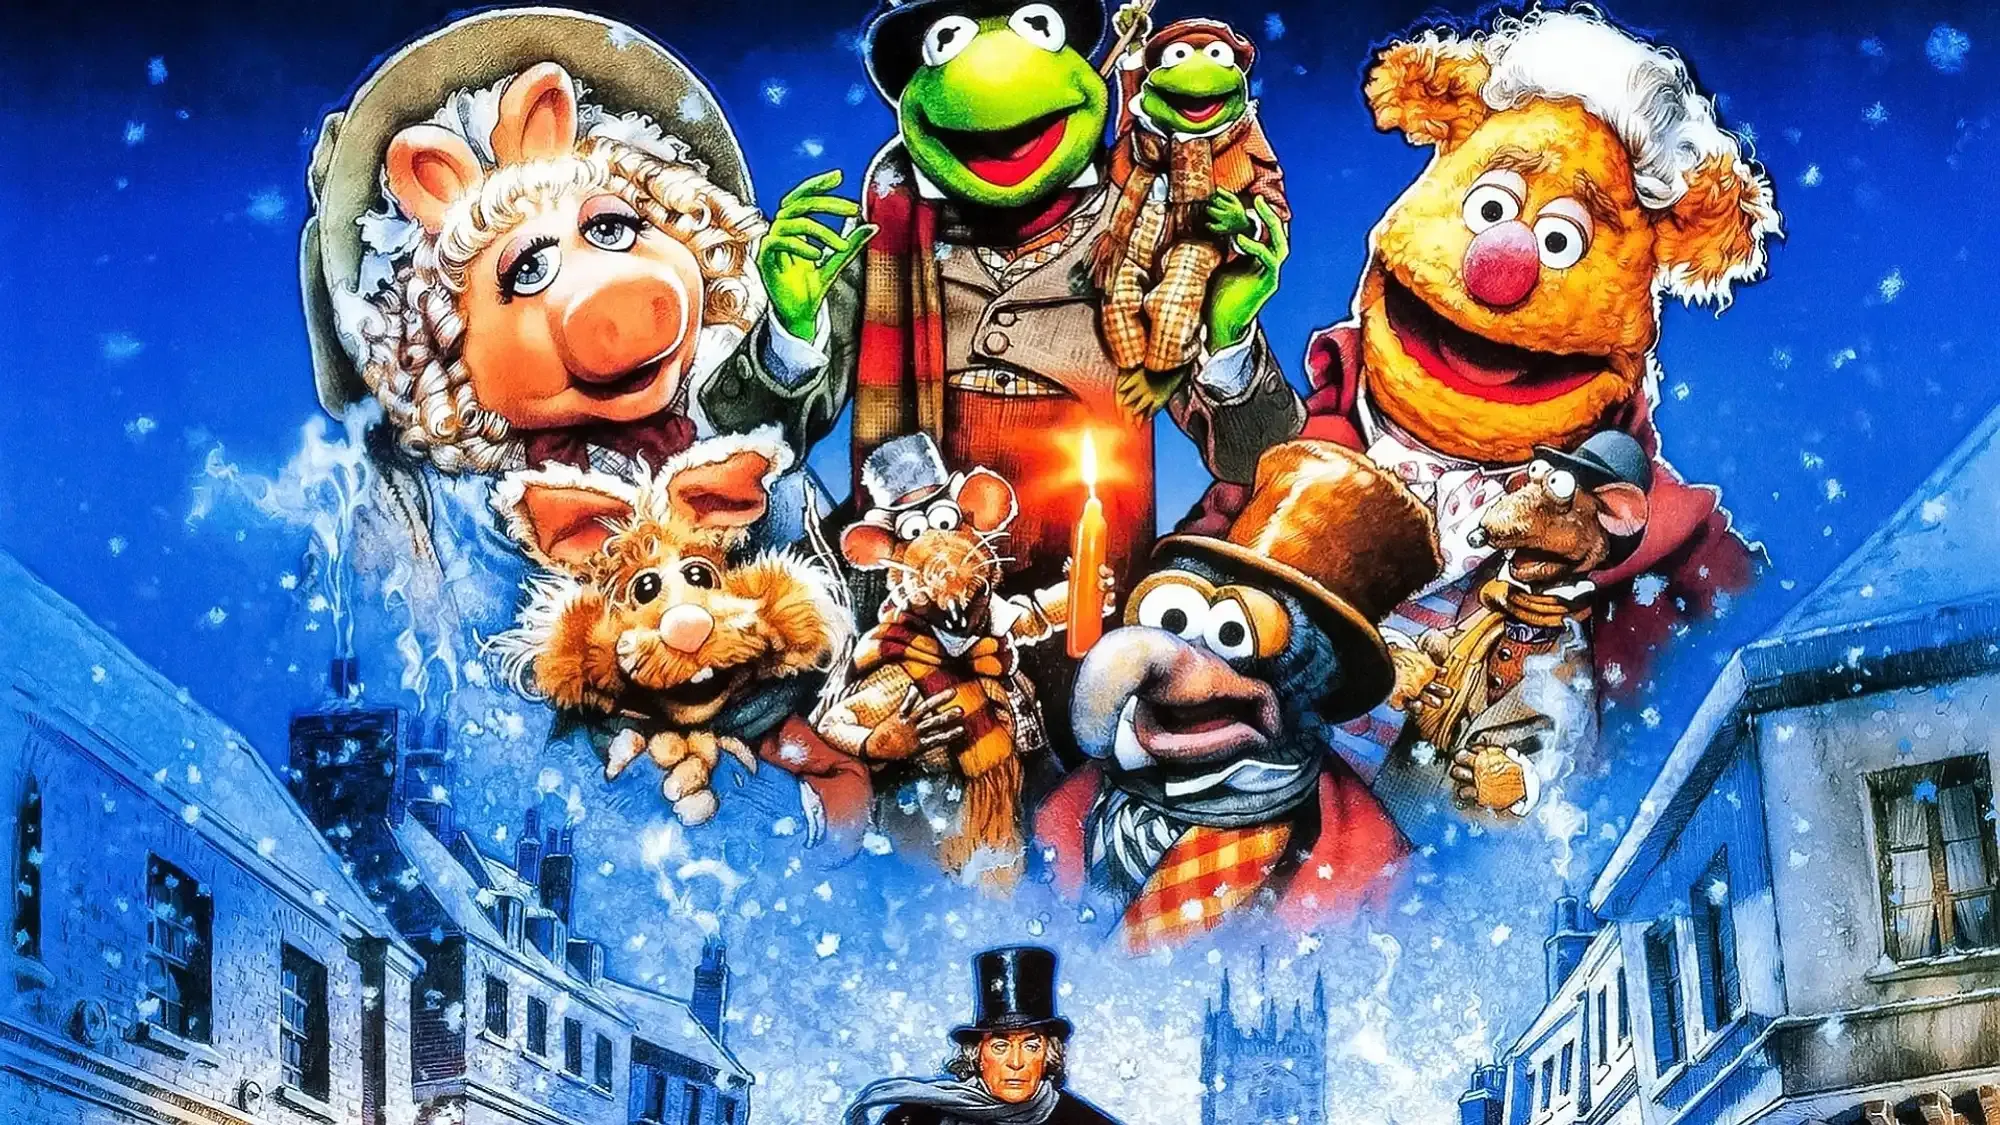 The Muppet Christmas Carol movie review